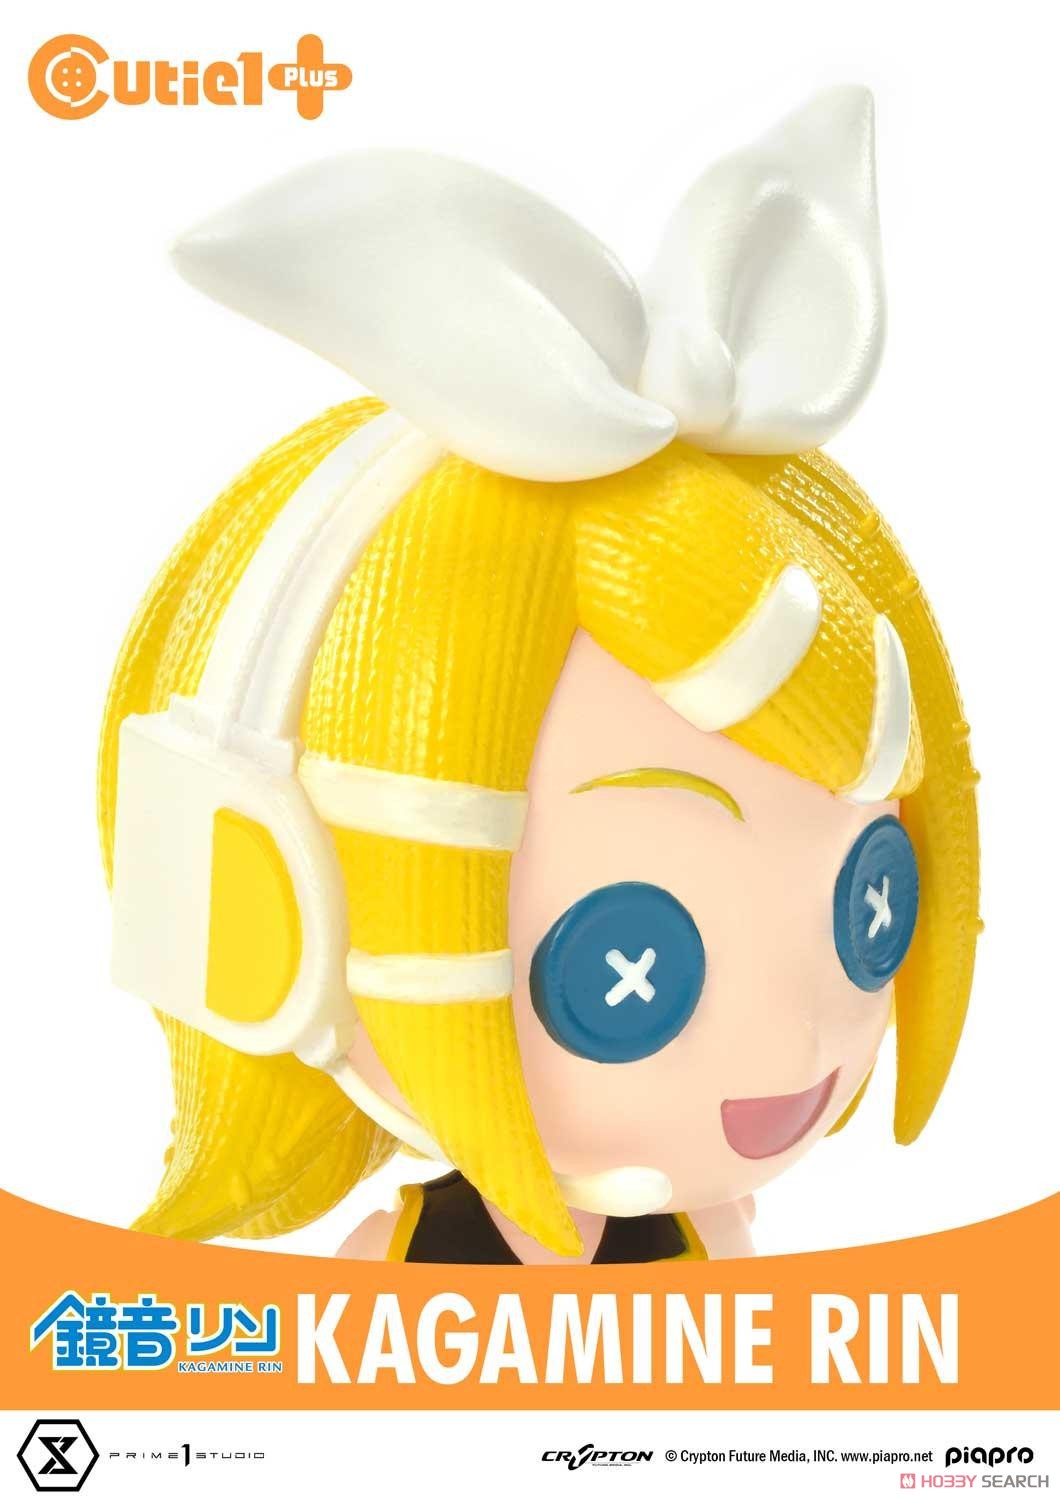 Cutie1 Plus Piapro Characters Kagamine Rin (Completed) Item picture10